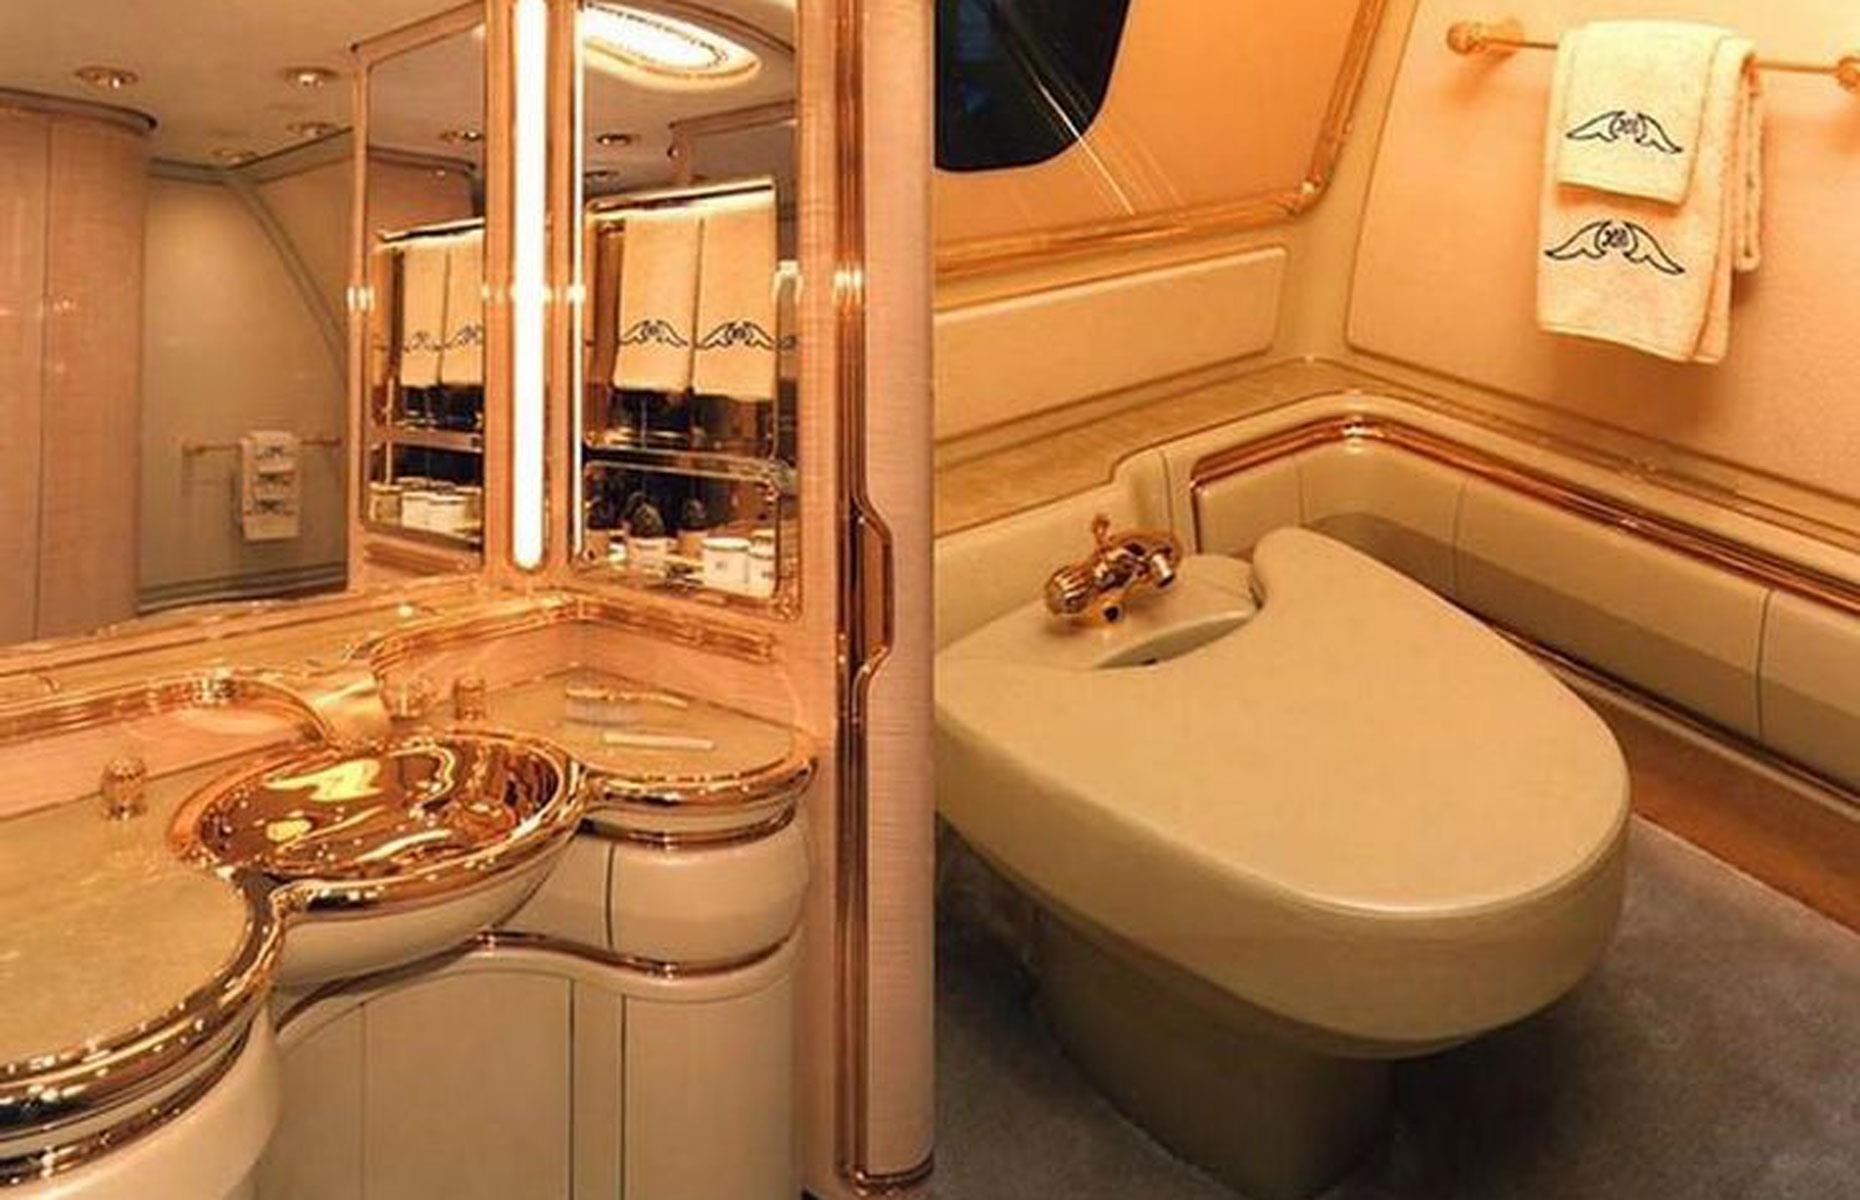 <p>The sultan's flagship aircraft is the definition of extravagance, with dazzling finishes at every turn throughout the cabin.</p>  <p>The royal bathroom in particular takes luxury to a whole new level, thanks to its solid 24-carat gold washbasin and sparkling Lalique crystal accents. </p>